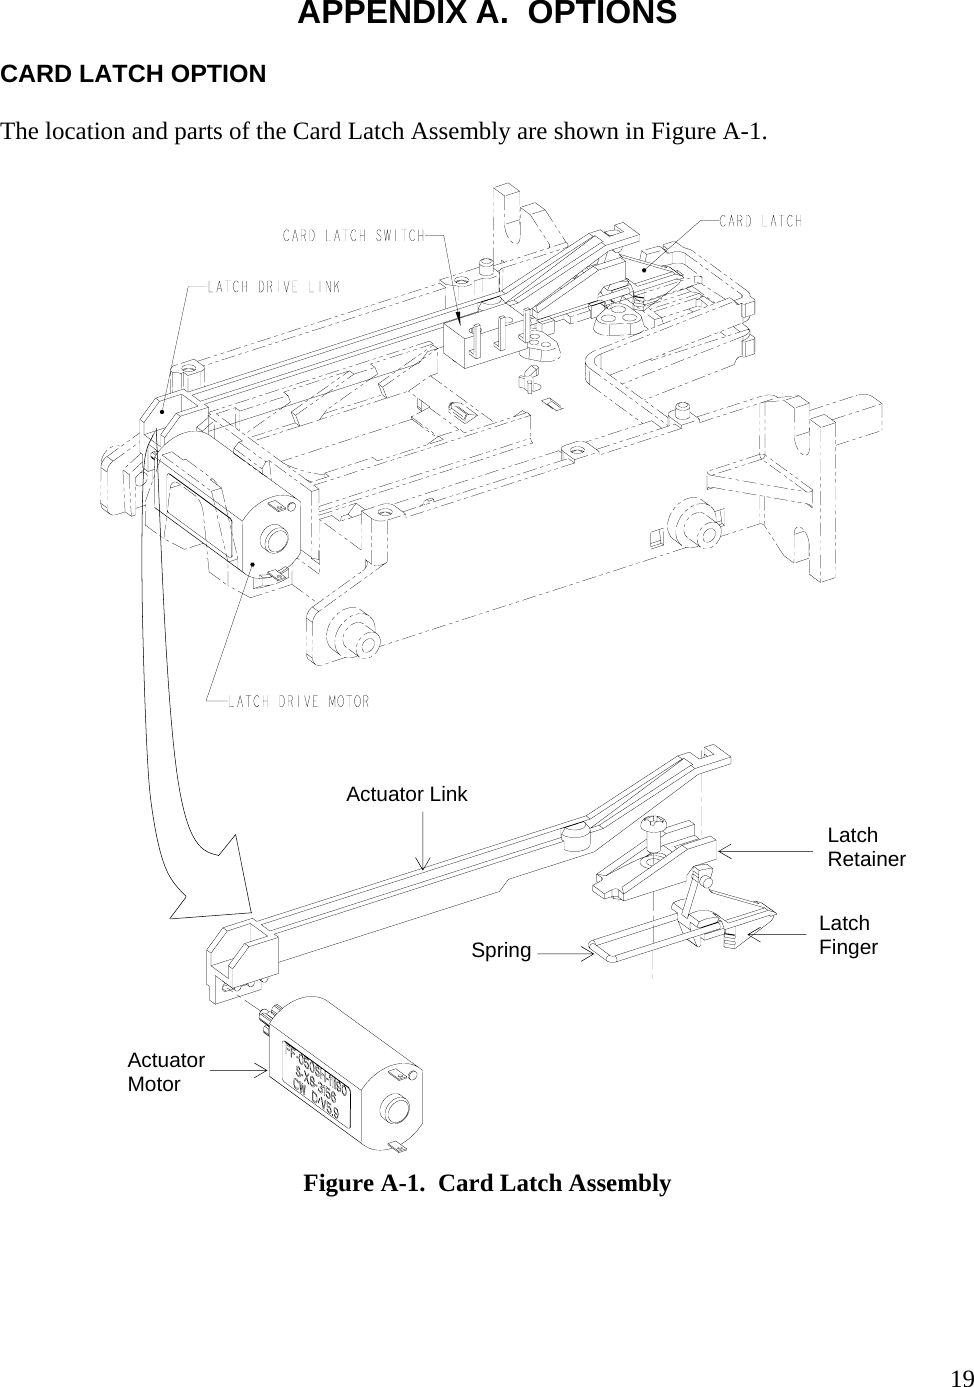   19APPENDIX A.  OPTIONS  CARD LATCH OPTION  The location and parts of the Card Latch Assembly are shown in Figure A-1.    Actuator Motor Spring Latch Retainer Actuator Link Latch Finger Figure A-1.  Card Latch Assembly 